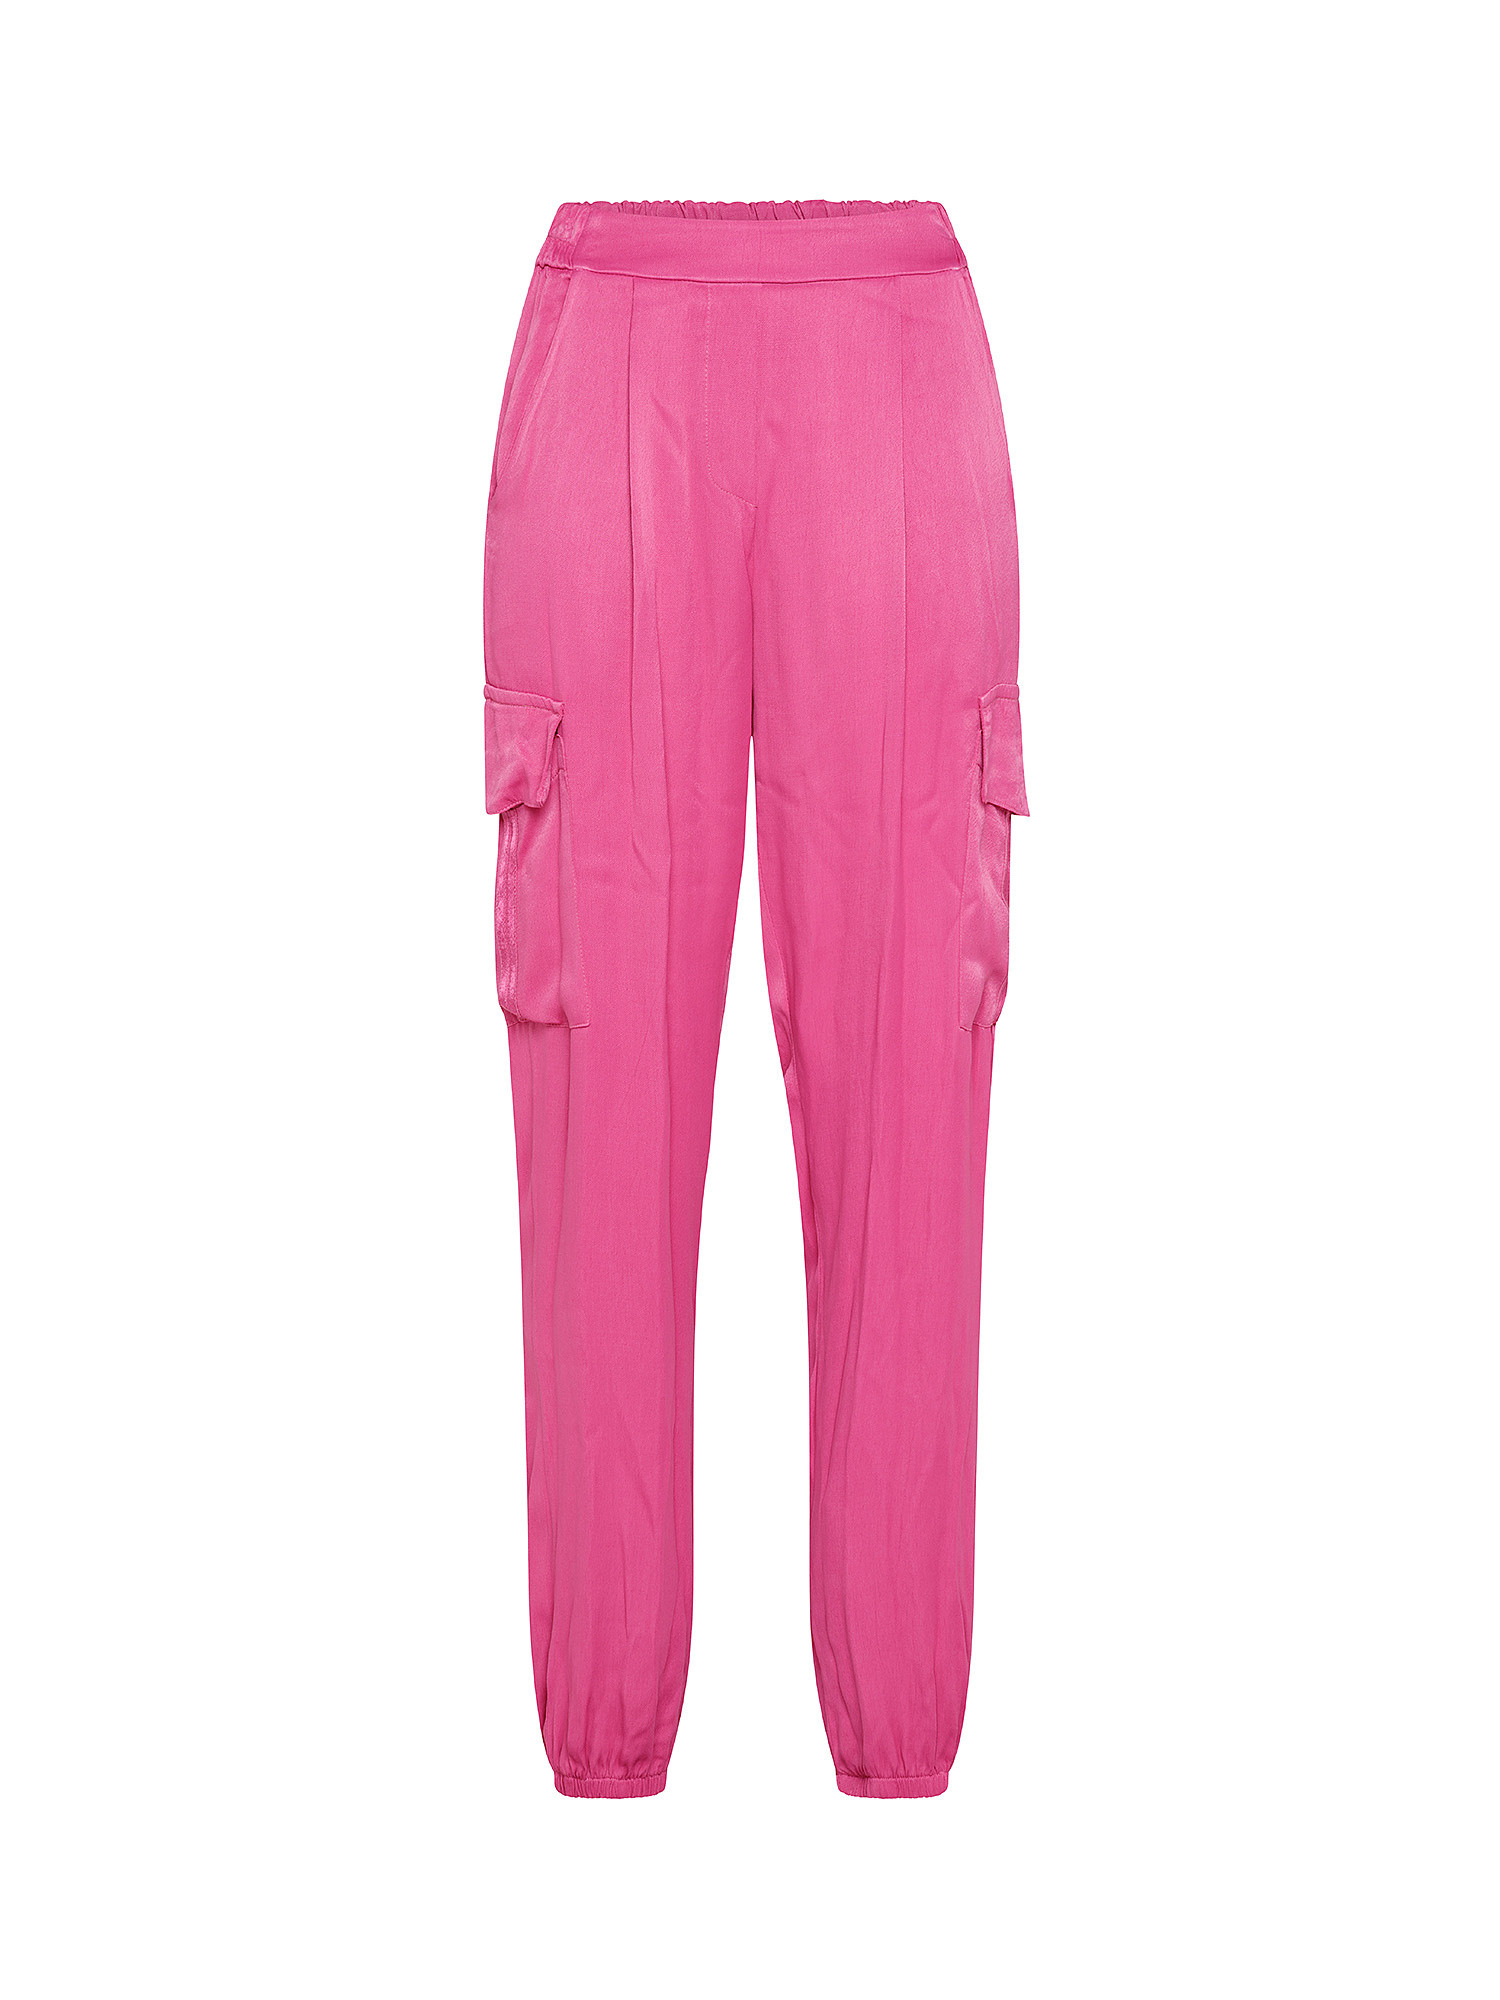 Cargo trousers, Pink Fuchsia, large image number 0